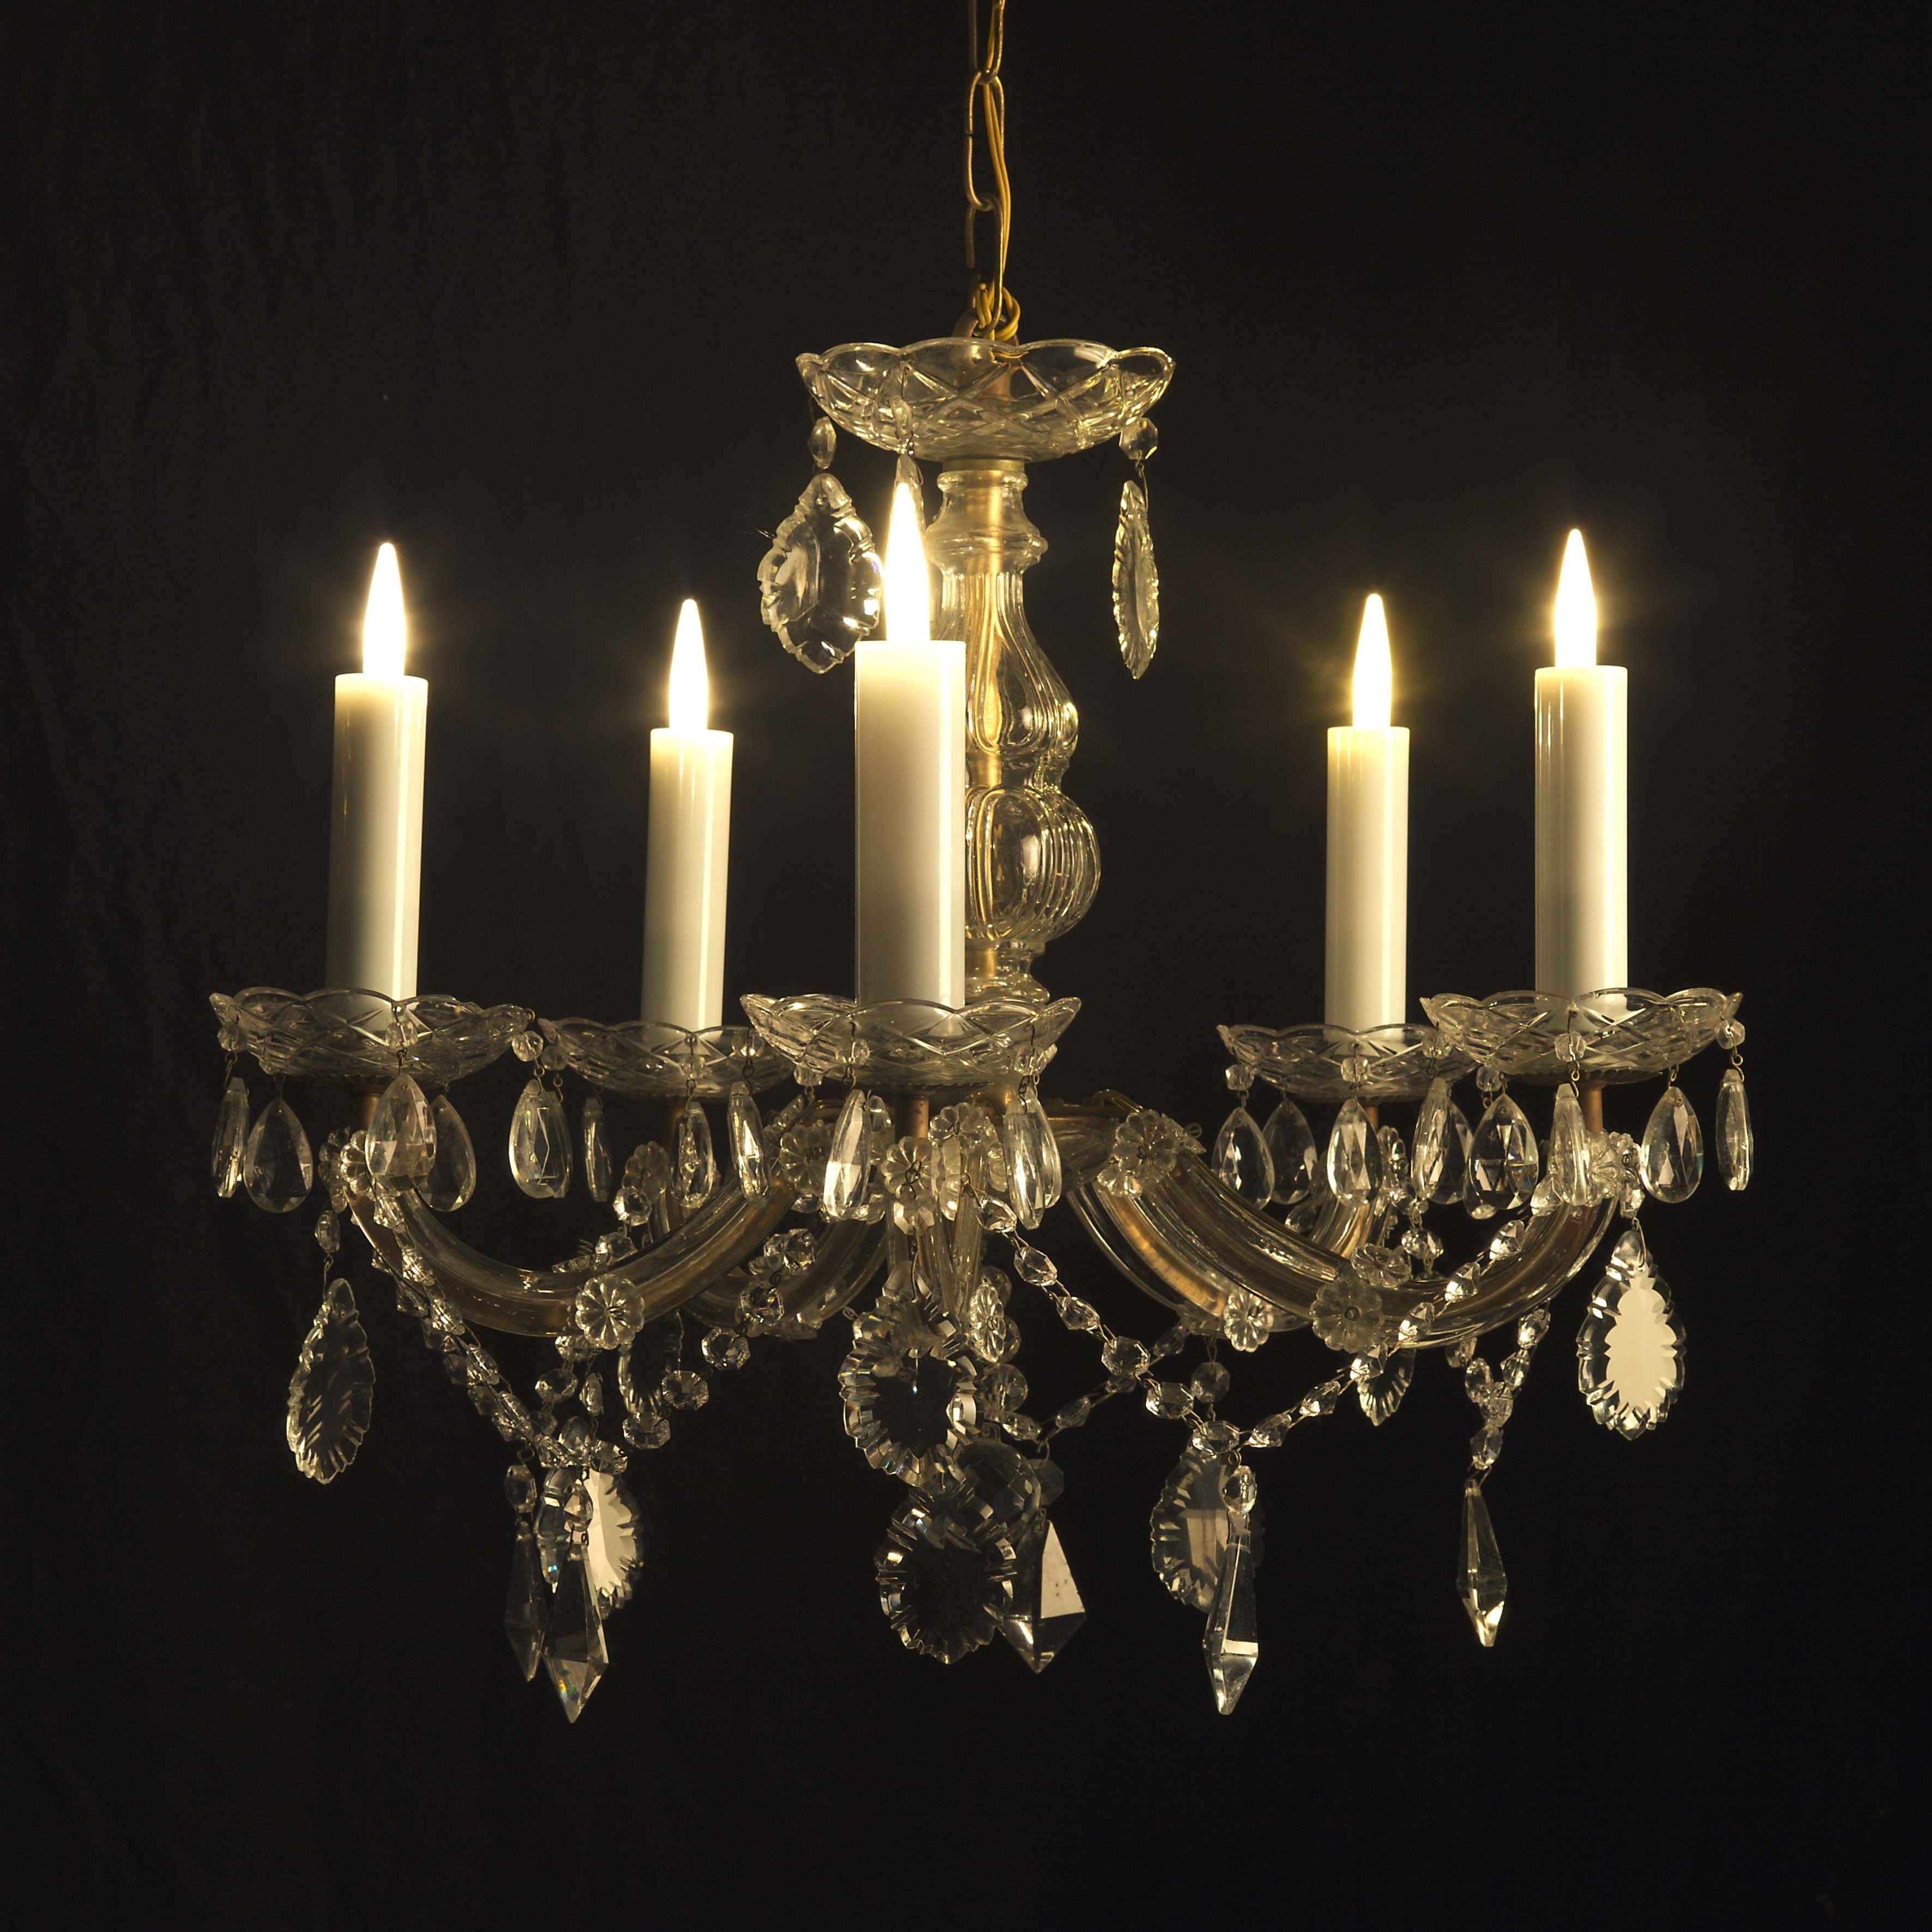 2017 Candle Chandelier Regarding Home Design : Exquisite Led Candle Chandelier Kevin Reilly Altar (View 5 of 15)